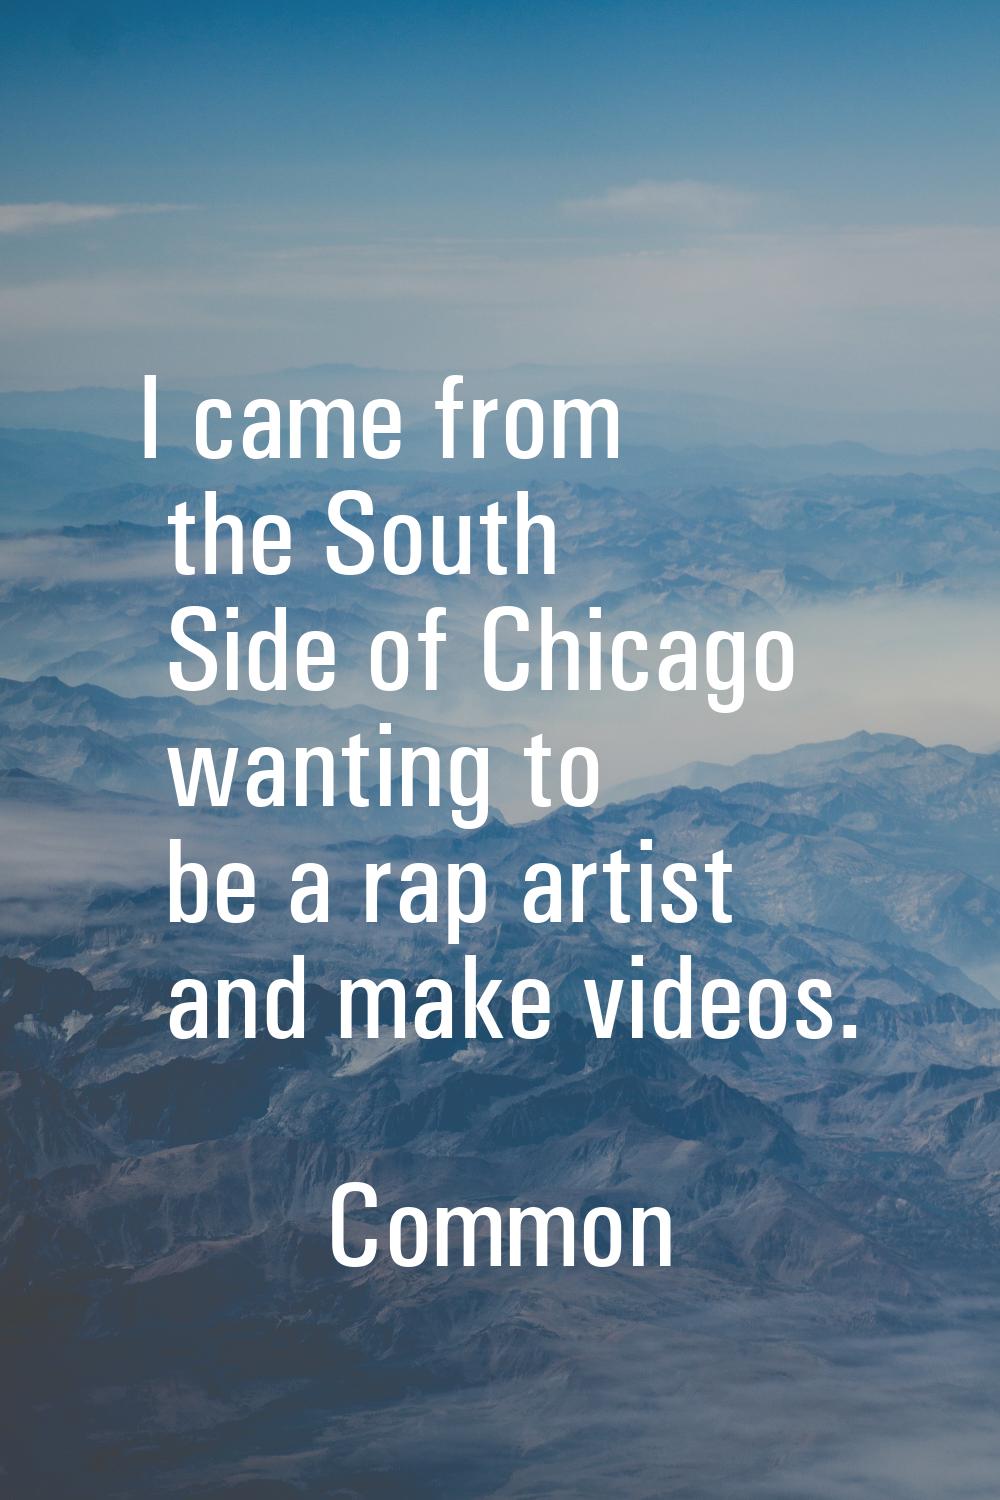 I came from the South Side of Chicago wanting to be a rap artist and make videos.